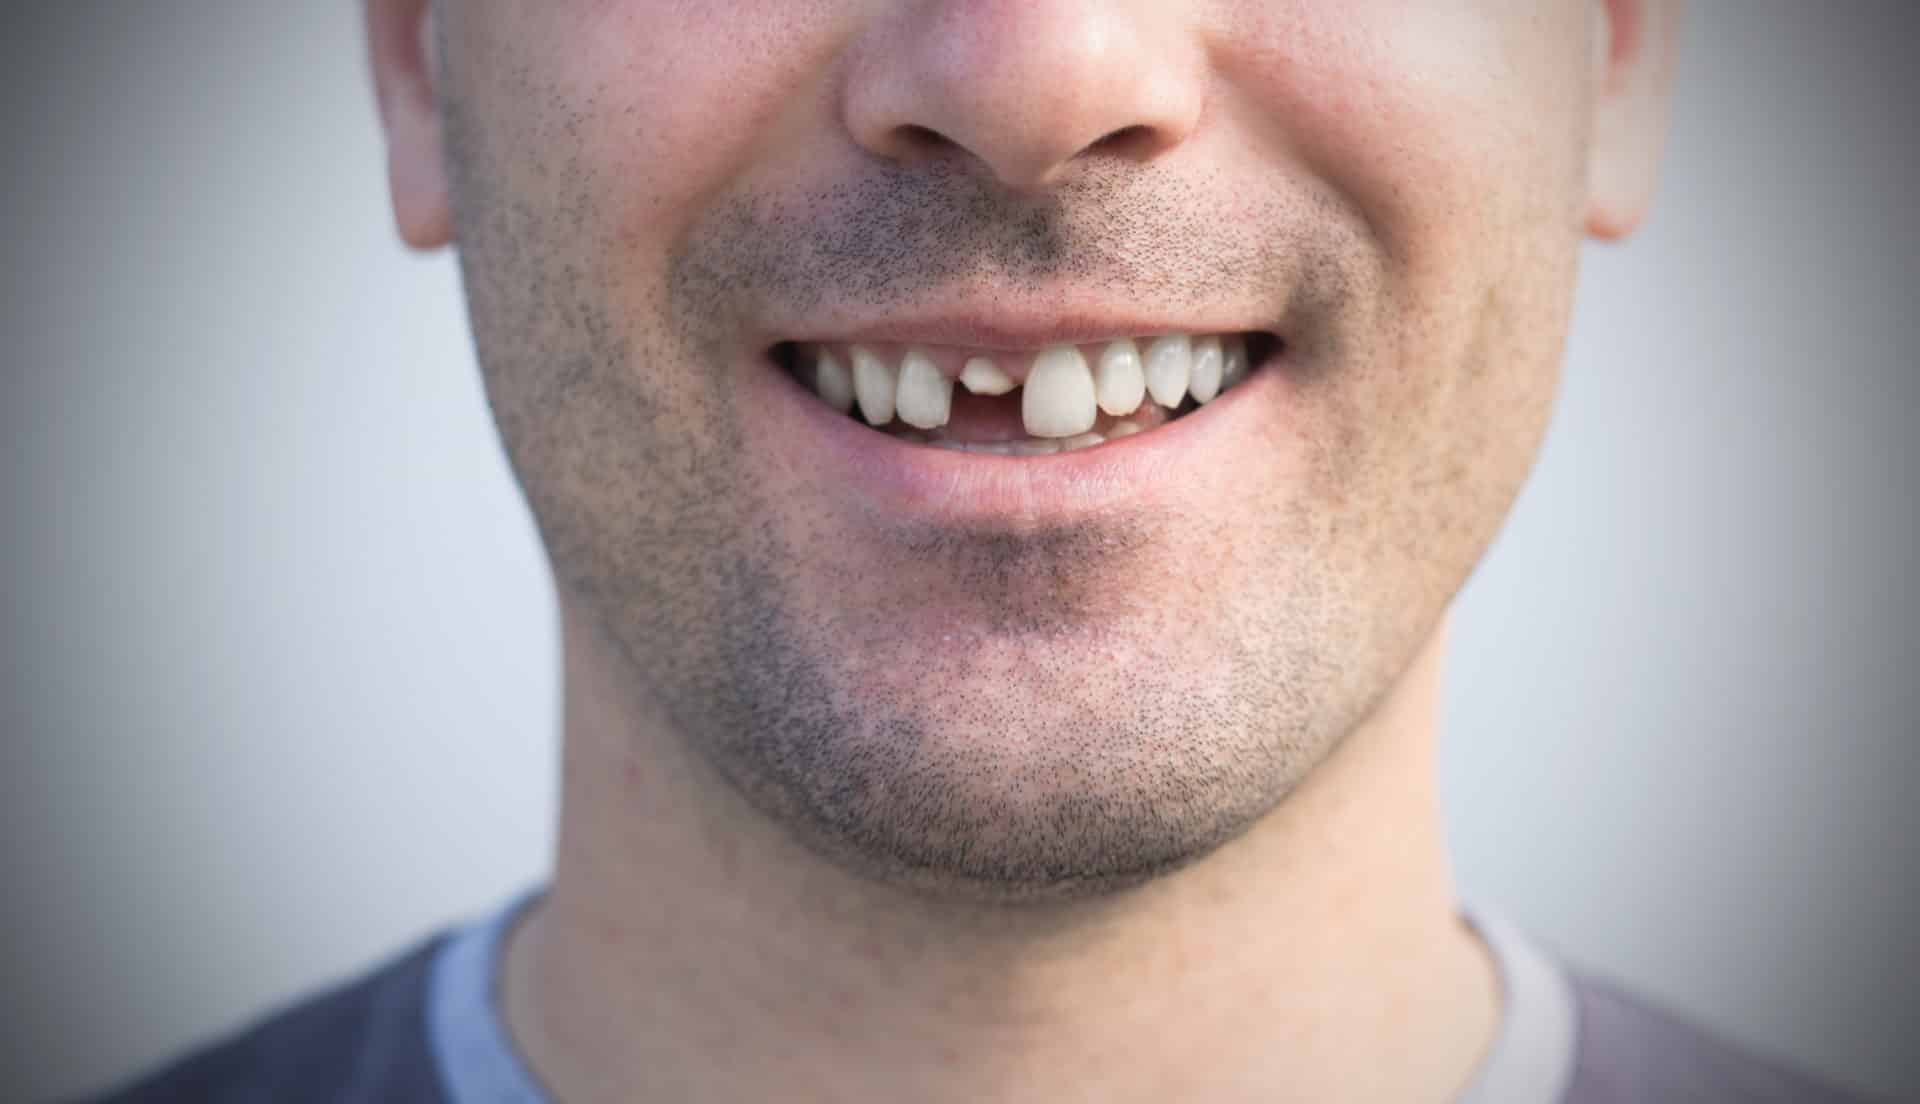 Male broken teeth damaged cracked front tooth needs a dental implant.